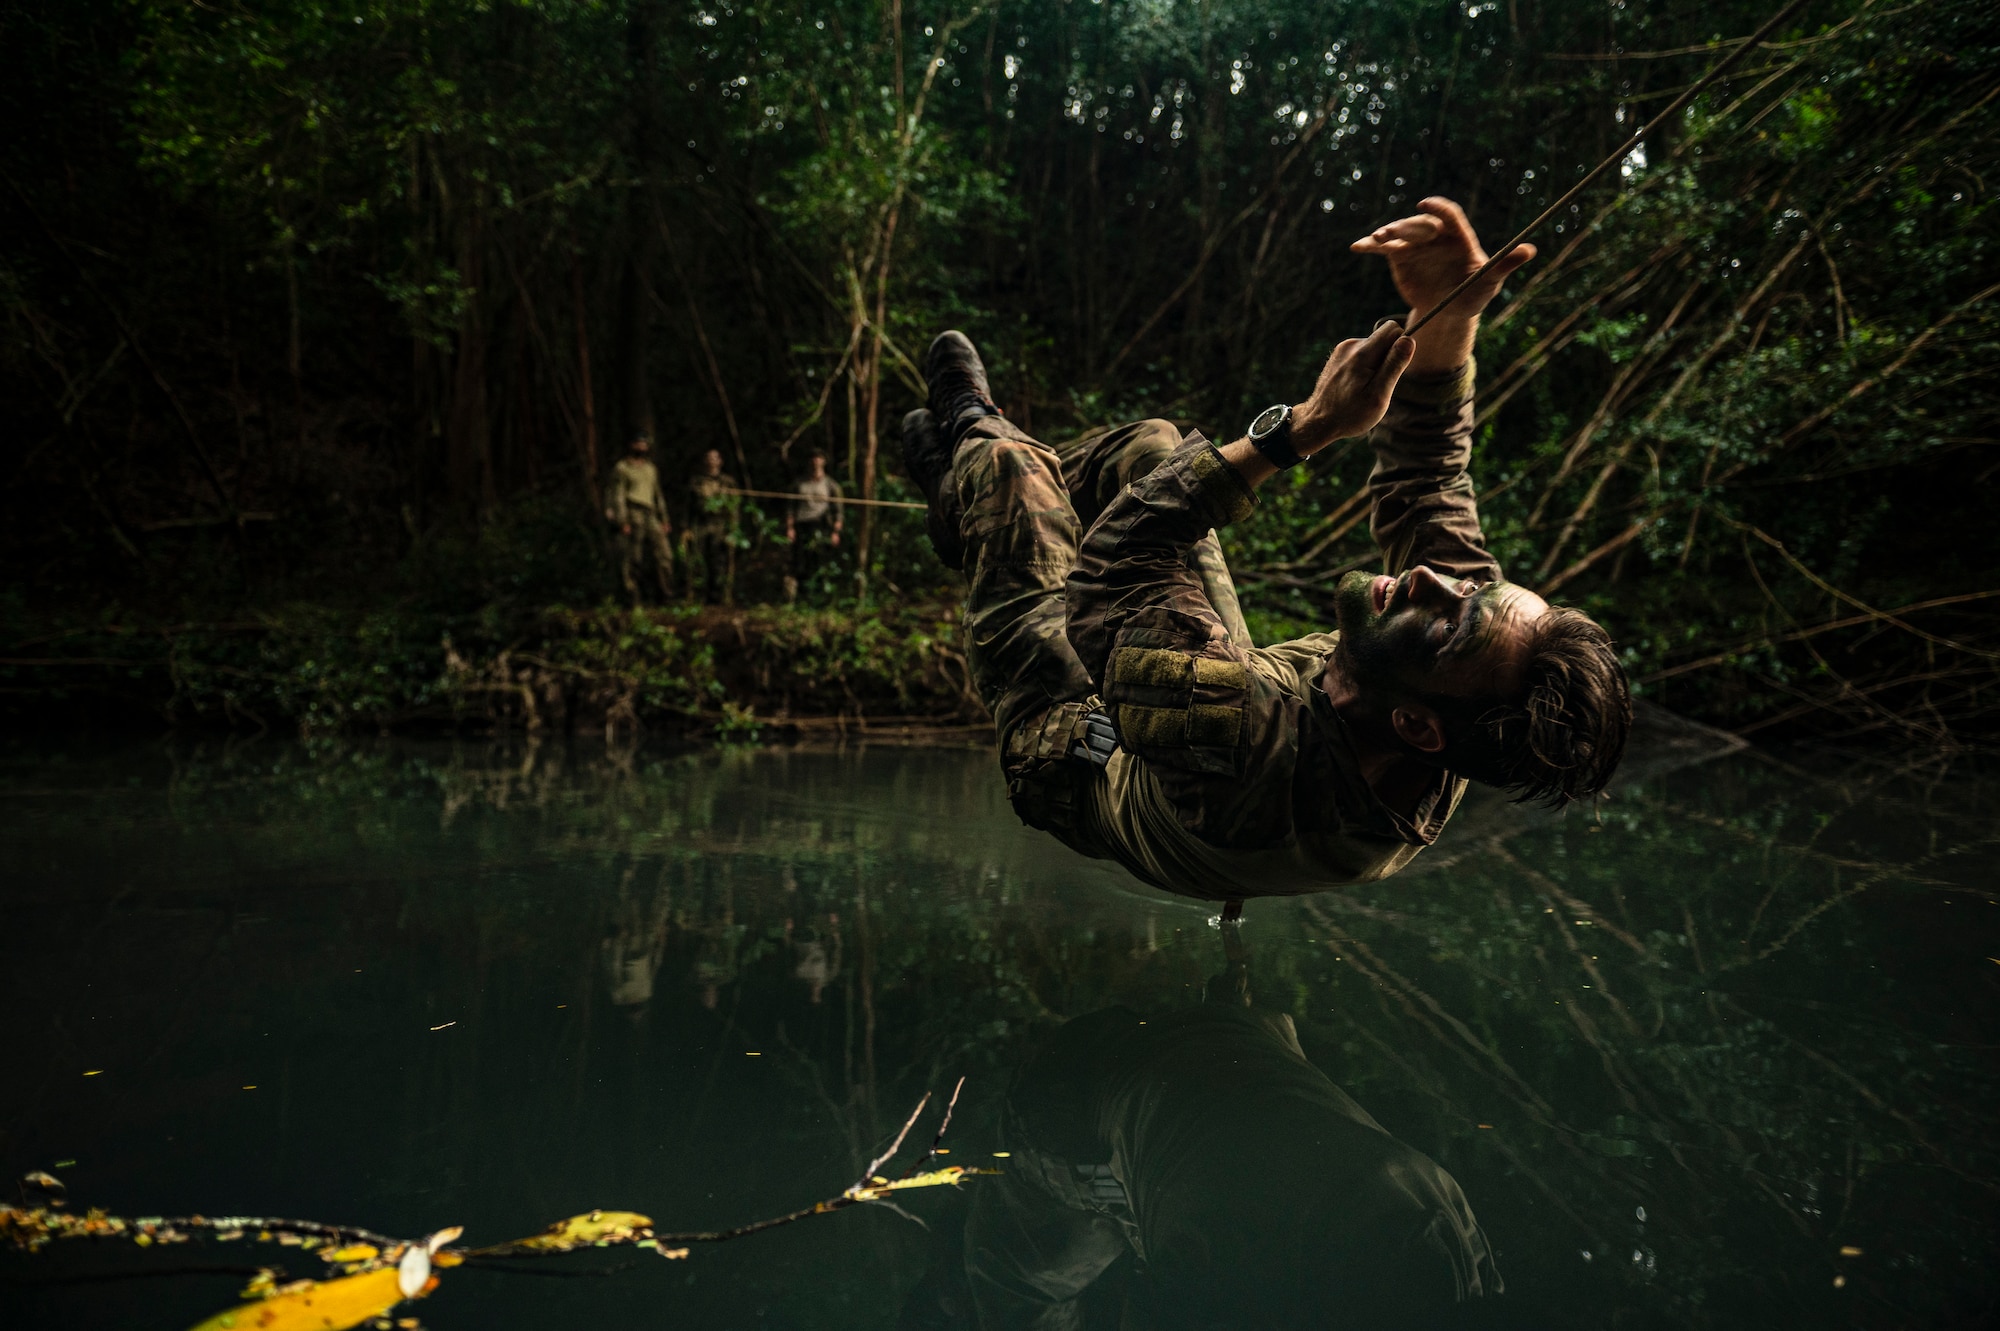 Photo of a Airman crossing a river on a rope